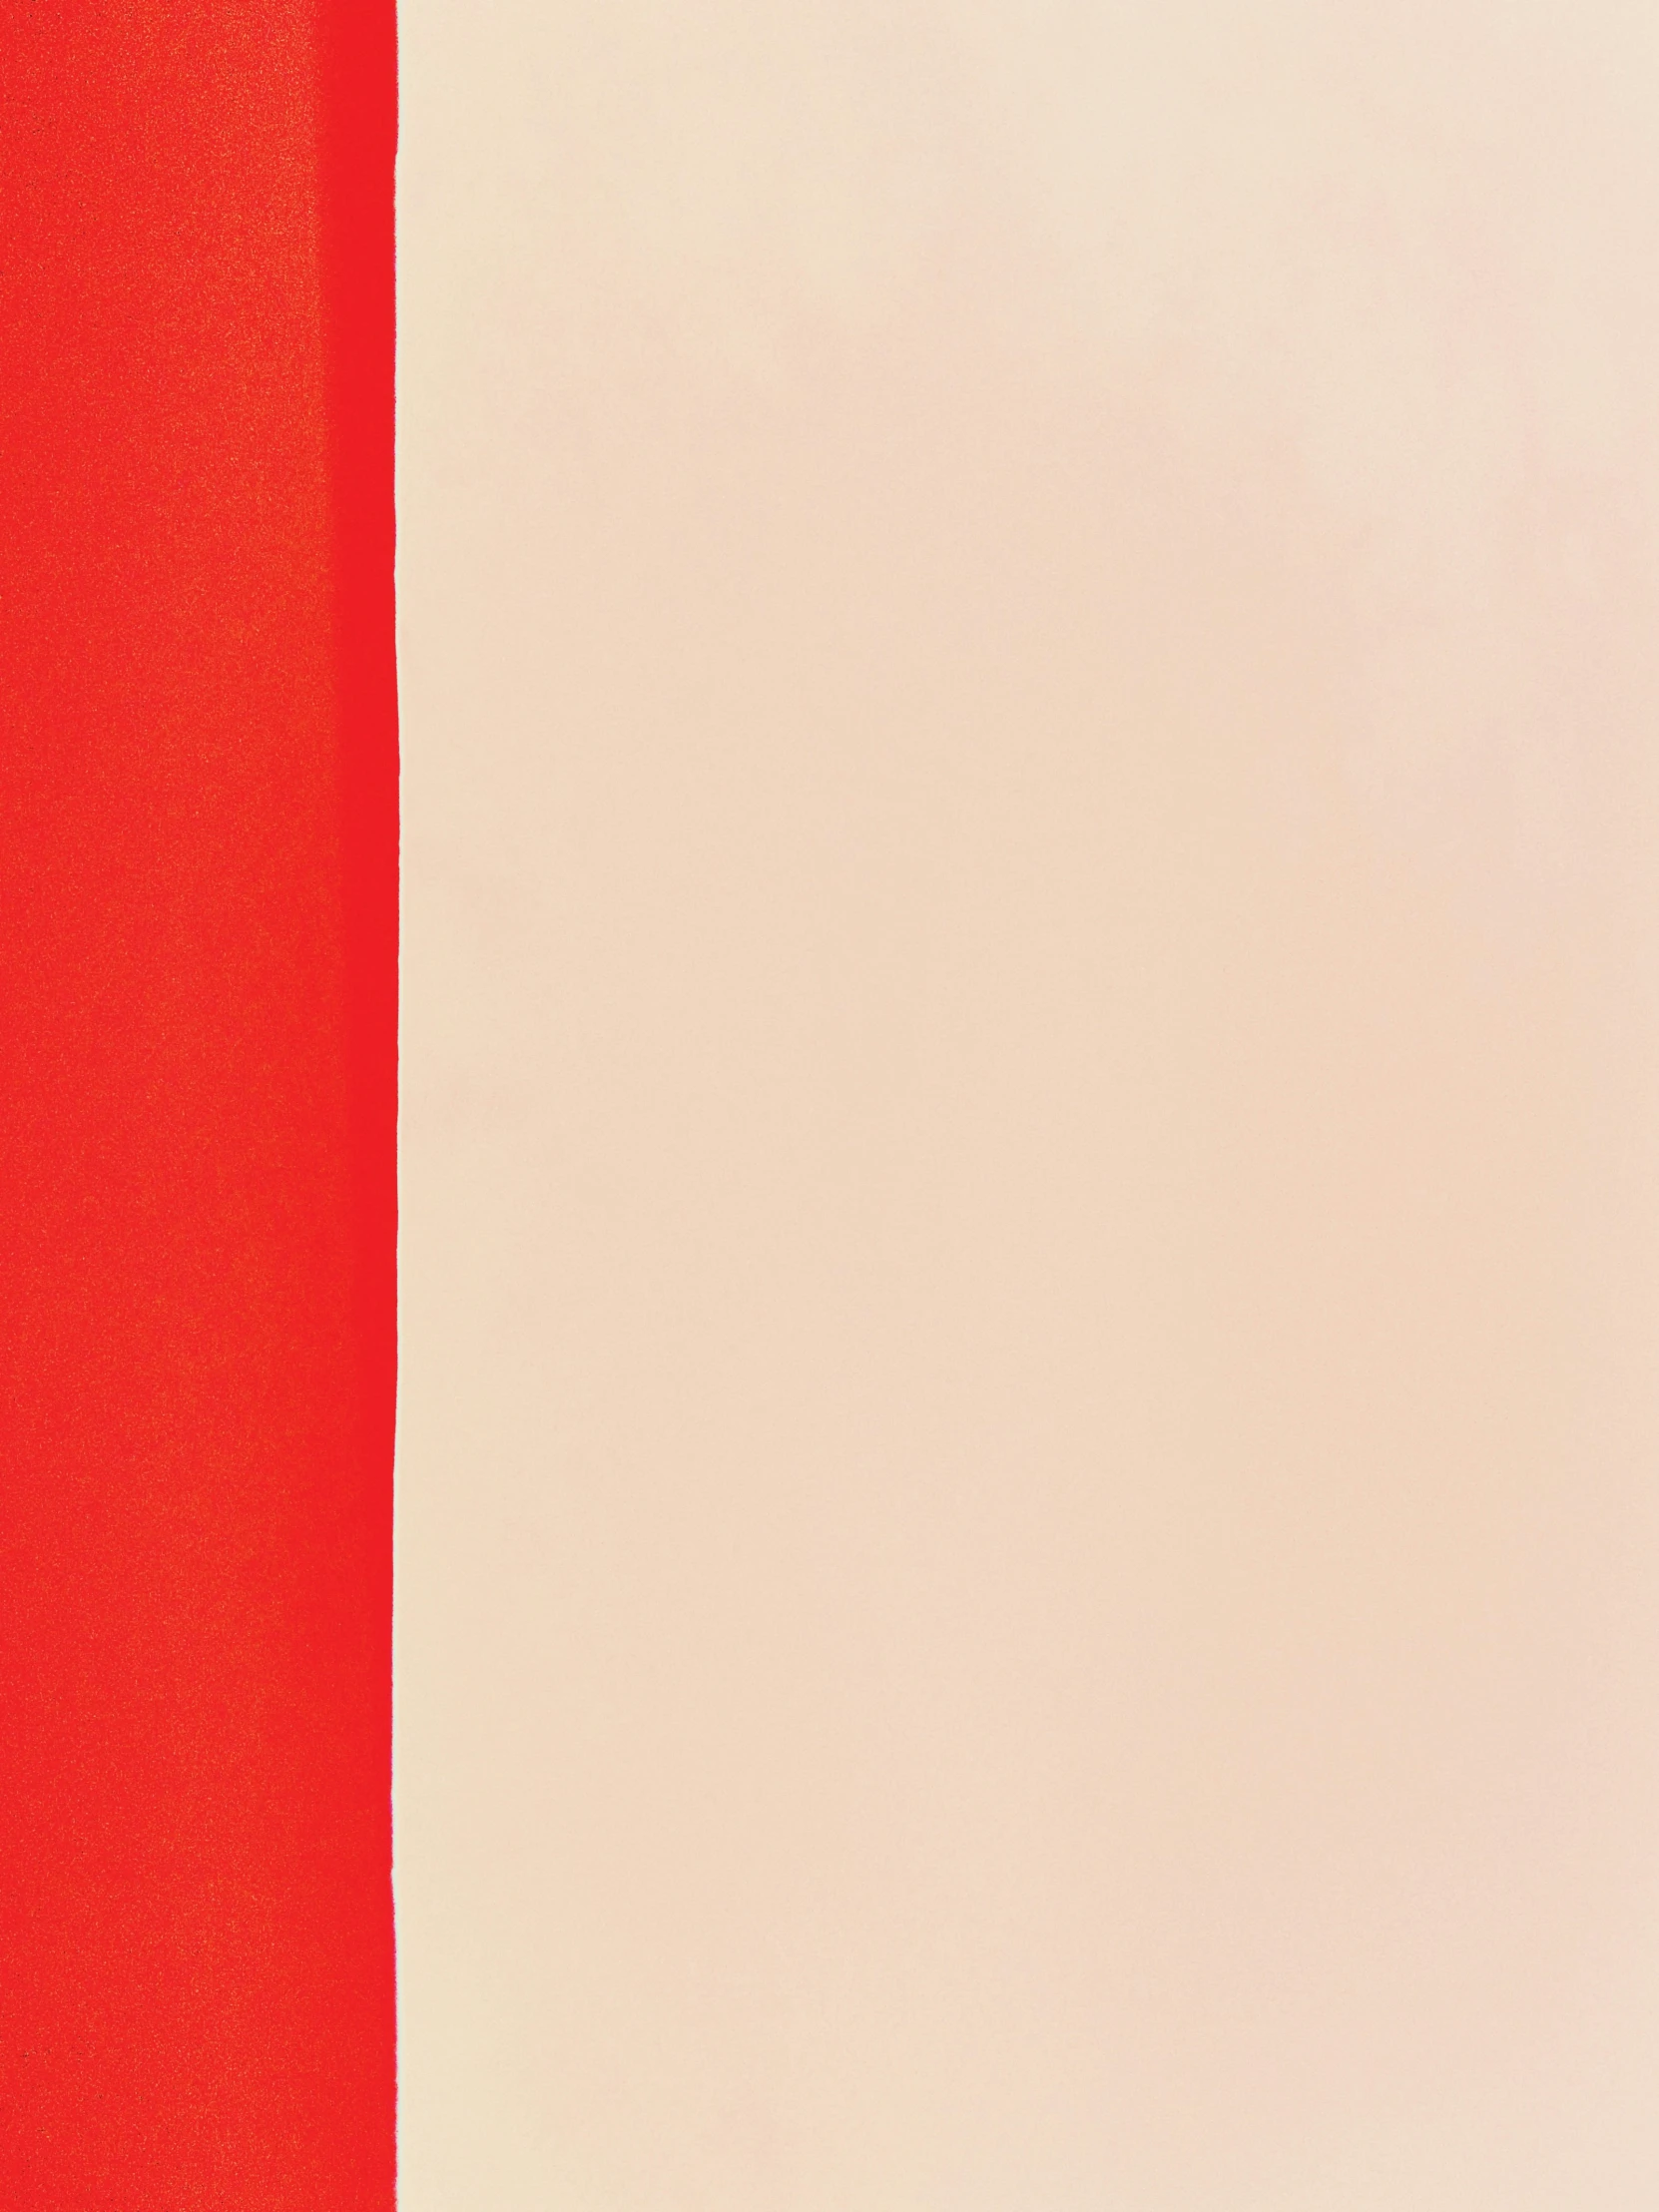 the white corner is visible against red and white background